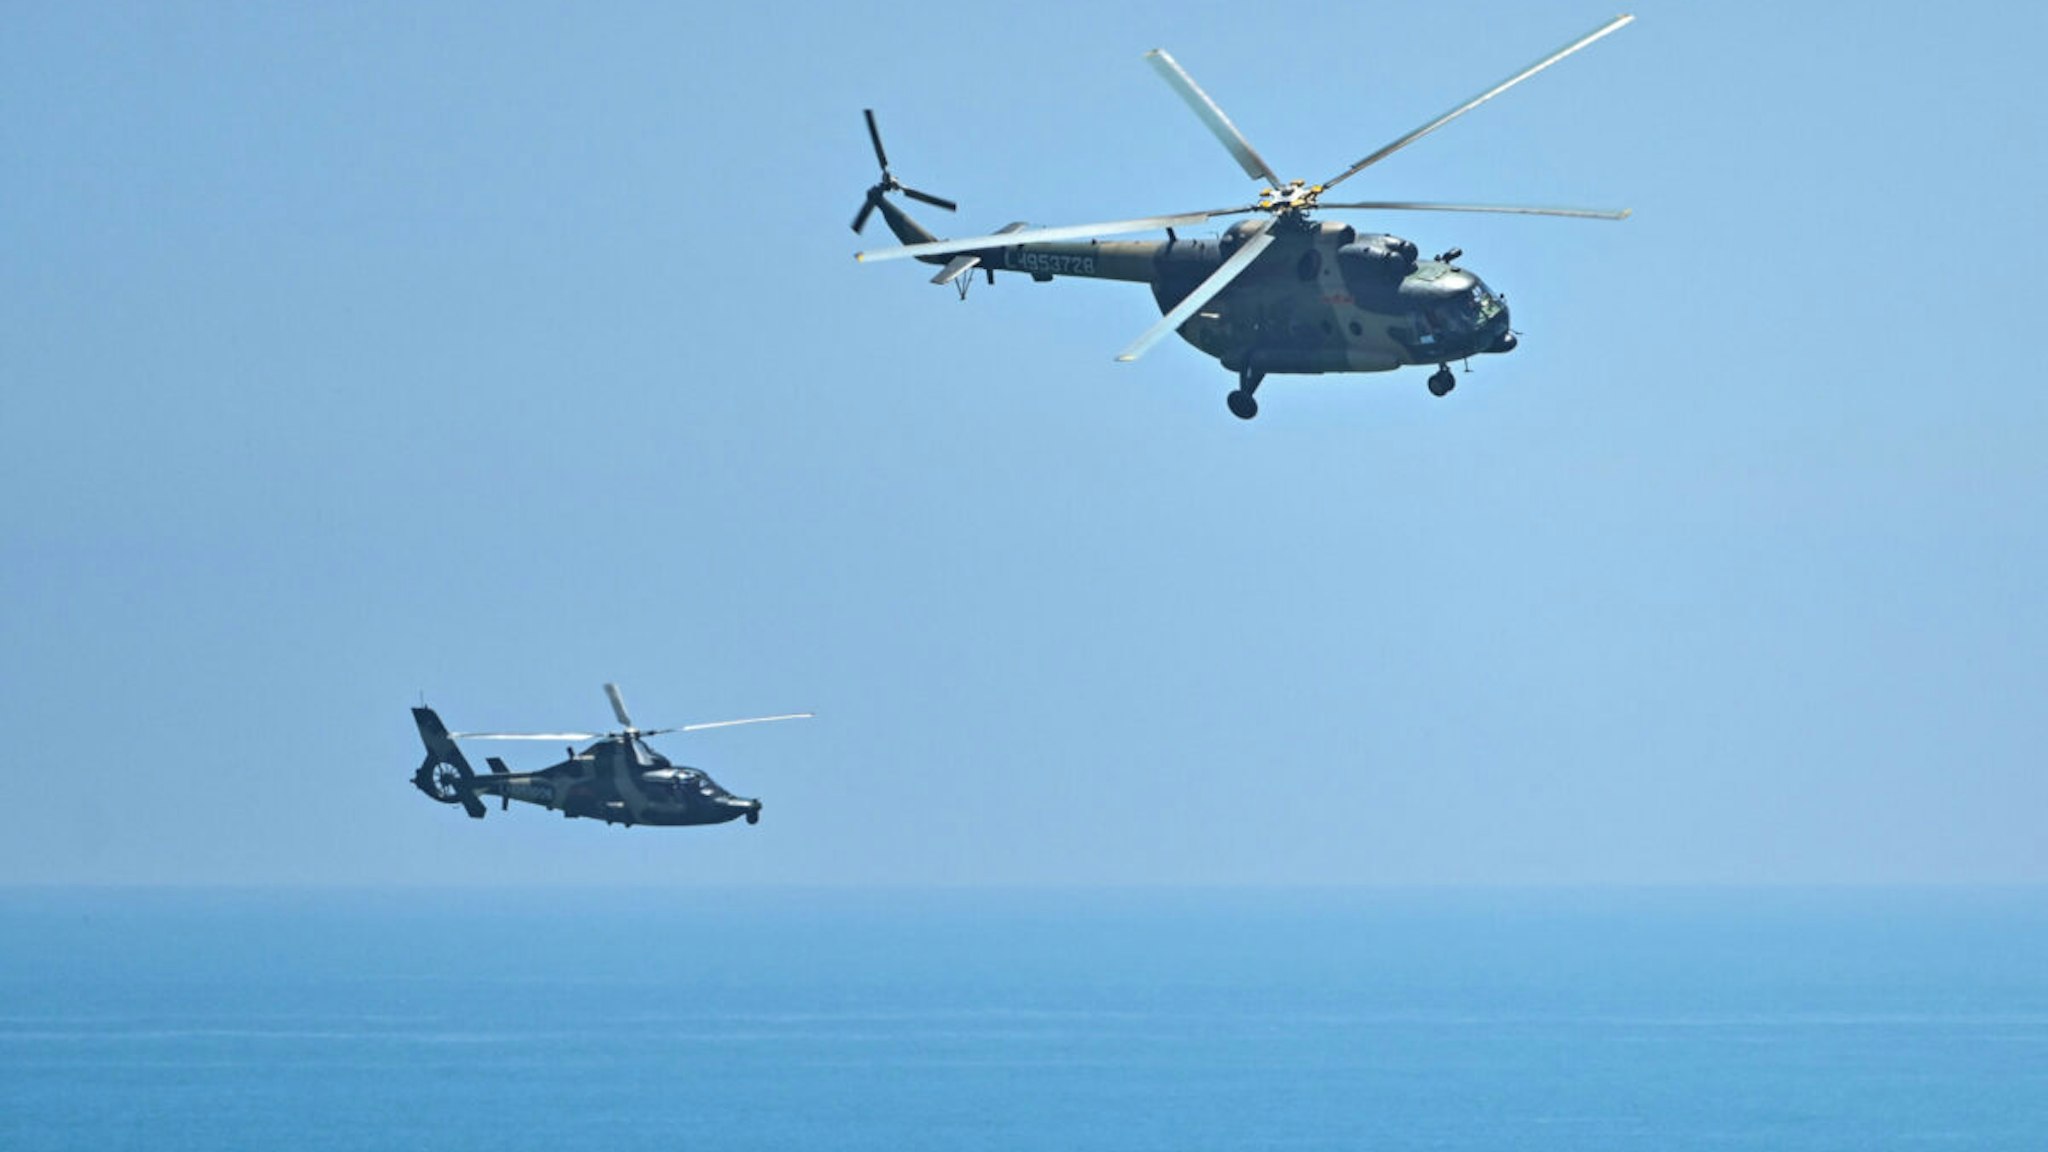 Chinese military helicopters fly past Pingtan island, one of mainland China's closest point from Taiwan, in Fujian province on August 4, 2022, ahead of massive military drills off Taiwan following US House Speaker Nancy Pelosi's visit to the self-ruled island. - China's largest-ever military exercises encircling Taiwan kicked off on August 4, in a show of force straddling vital international shipping lanes after a visit to the island by US House Speaker Nancy Pelosi.